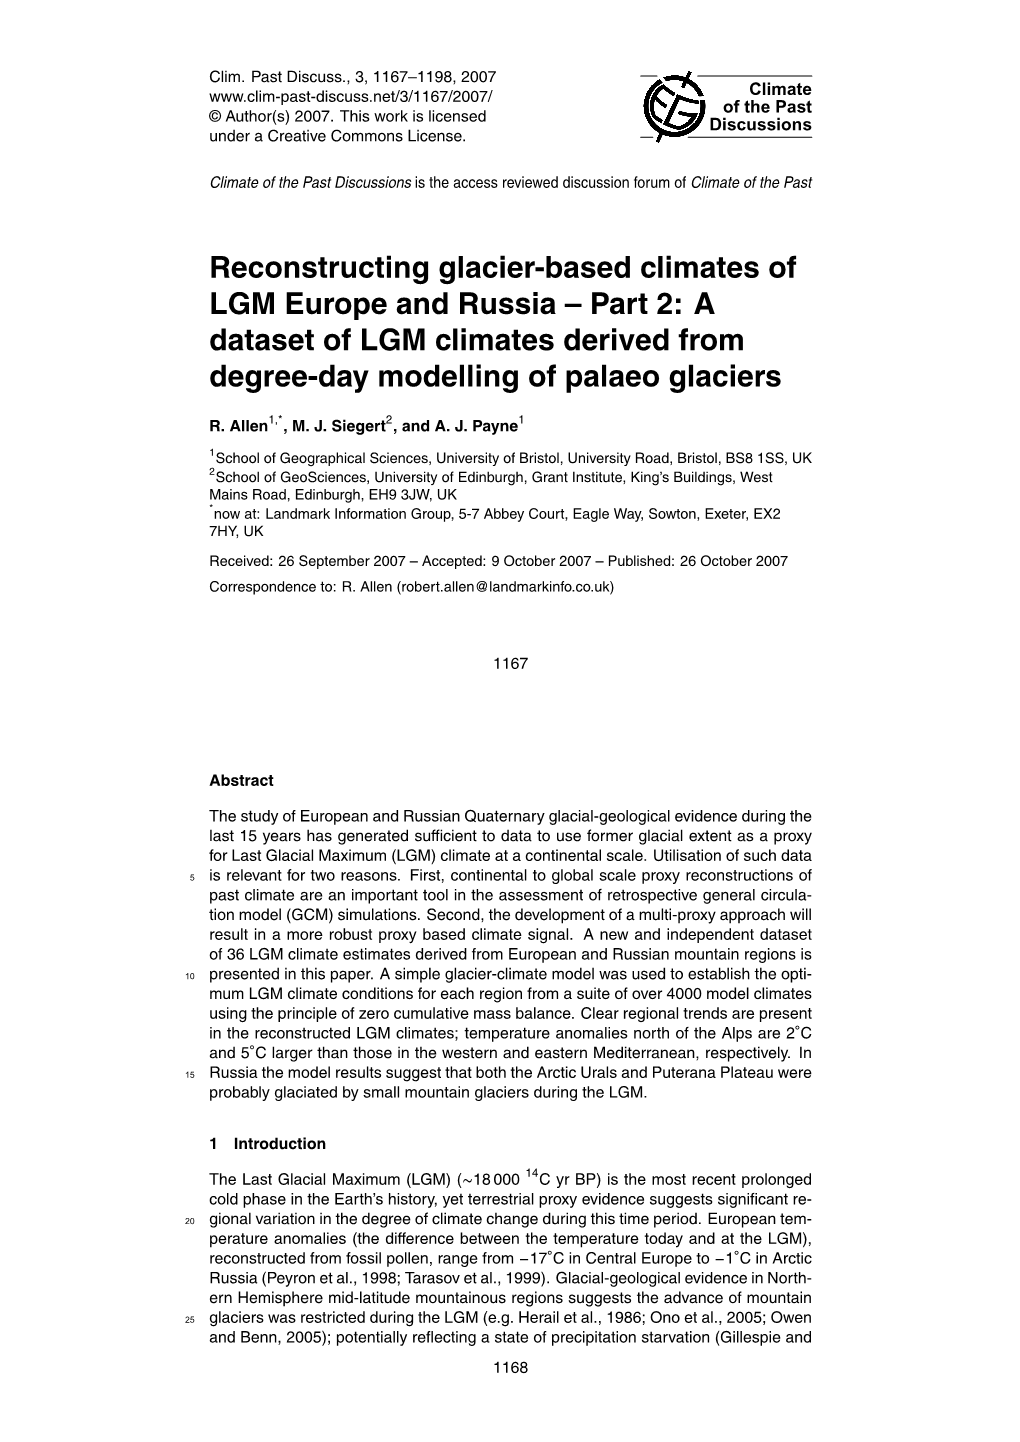 Reconstructing Glacier-Based Climates of LGM Europe and Russia – Part 2: a Dataset of LGM Climates Derived from Degree-Day Modelling of Palaeo Glaciers